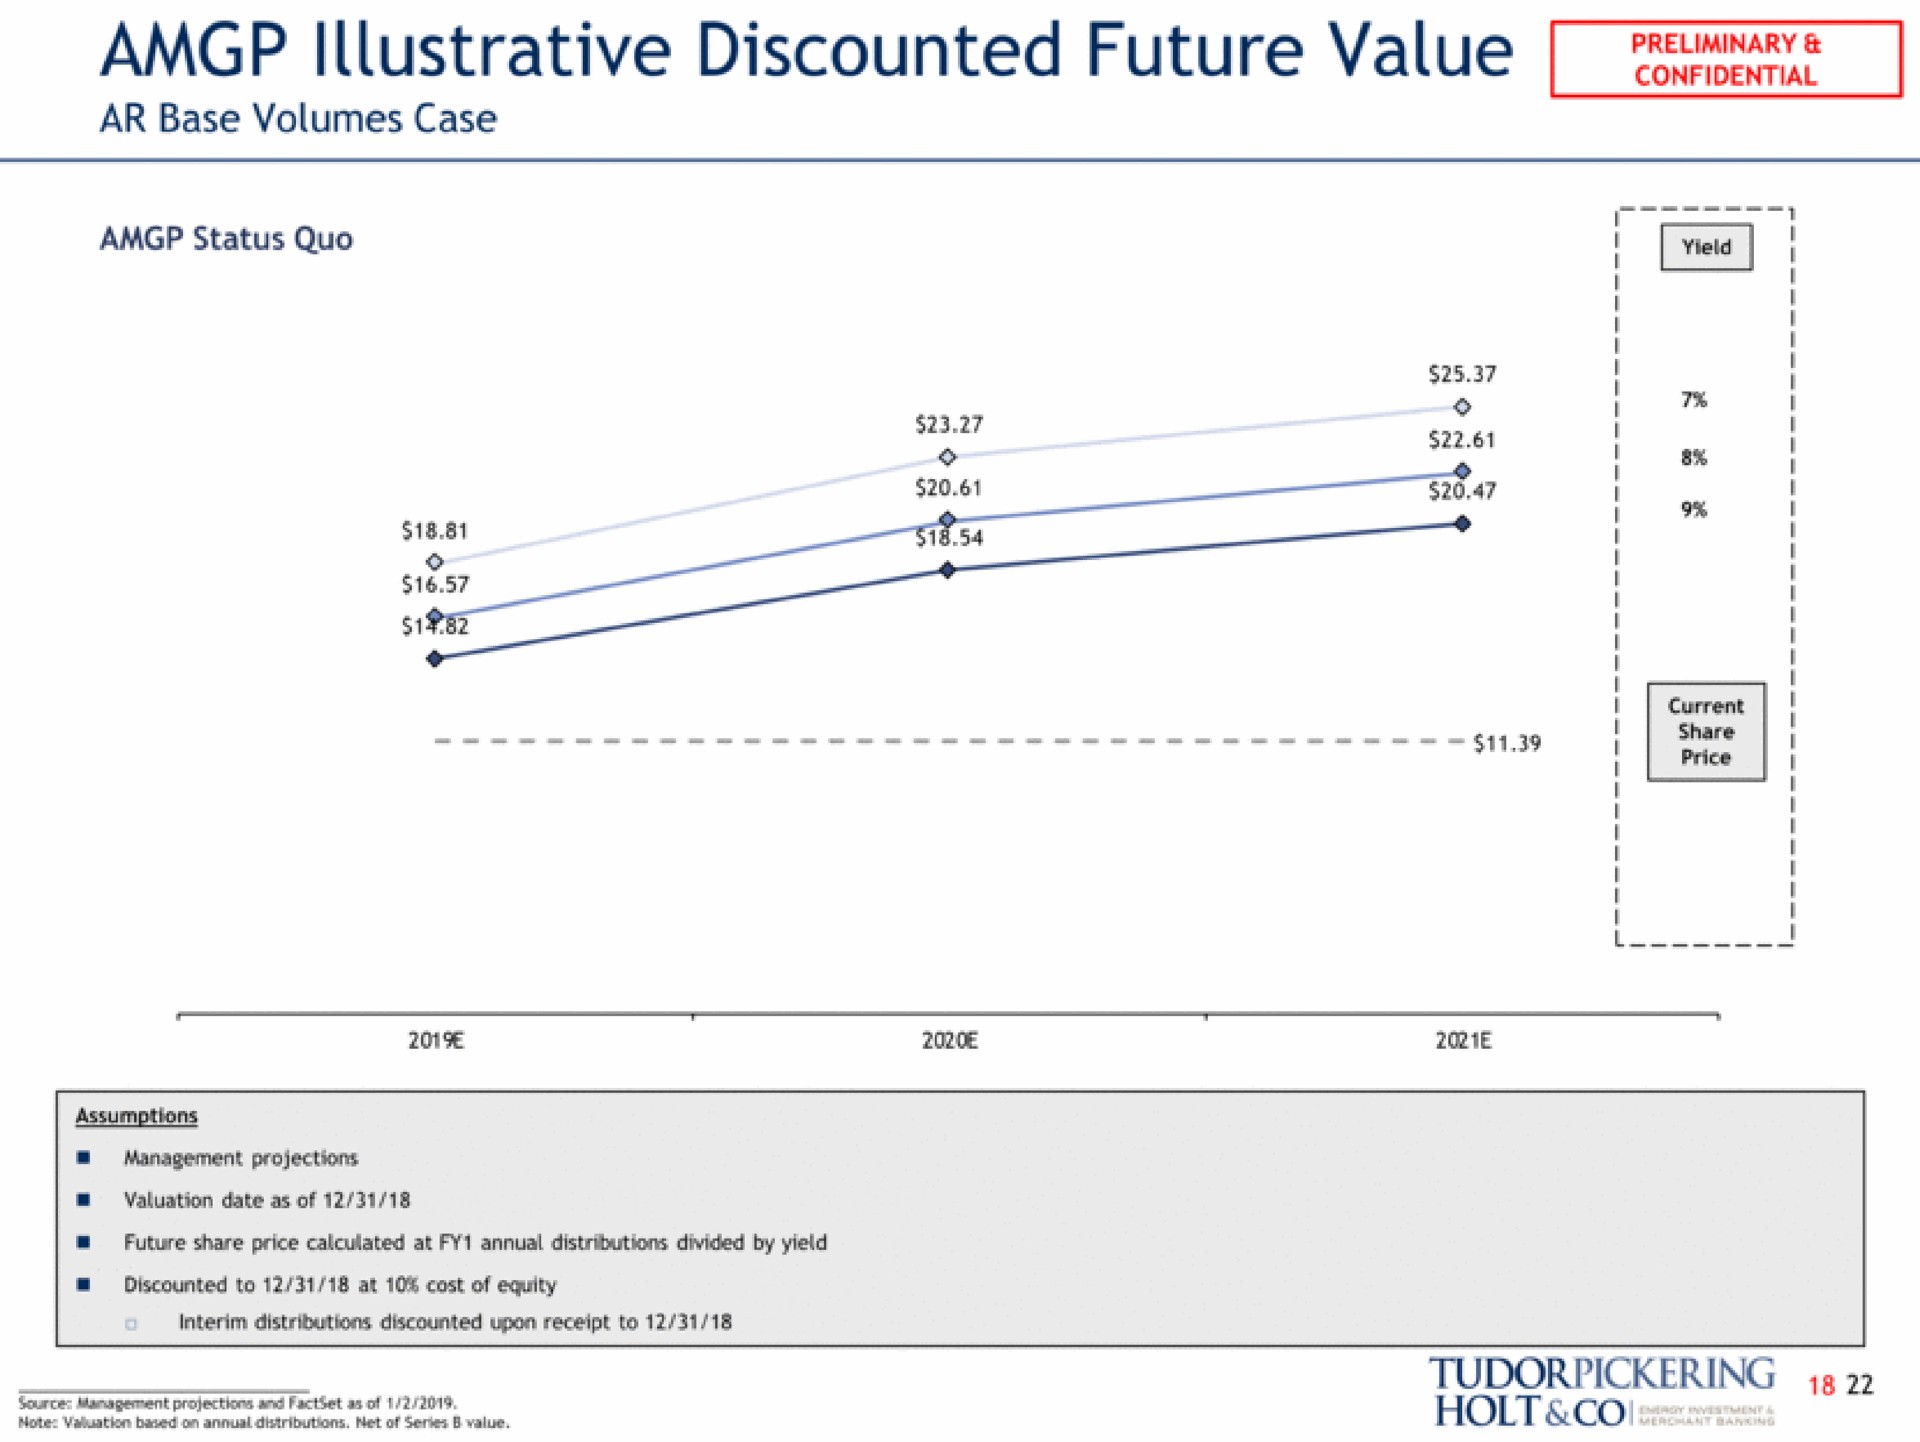 illustrative discounted future value note based on annual net of series value holt coo | Tudor, Pickering, Holt & Co